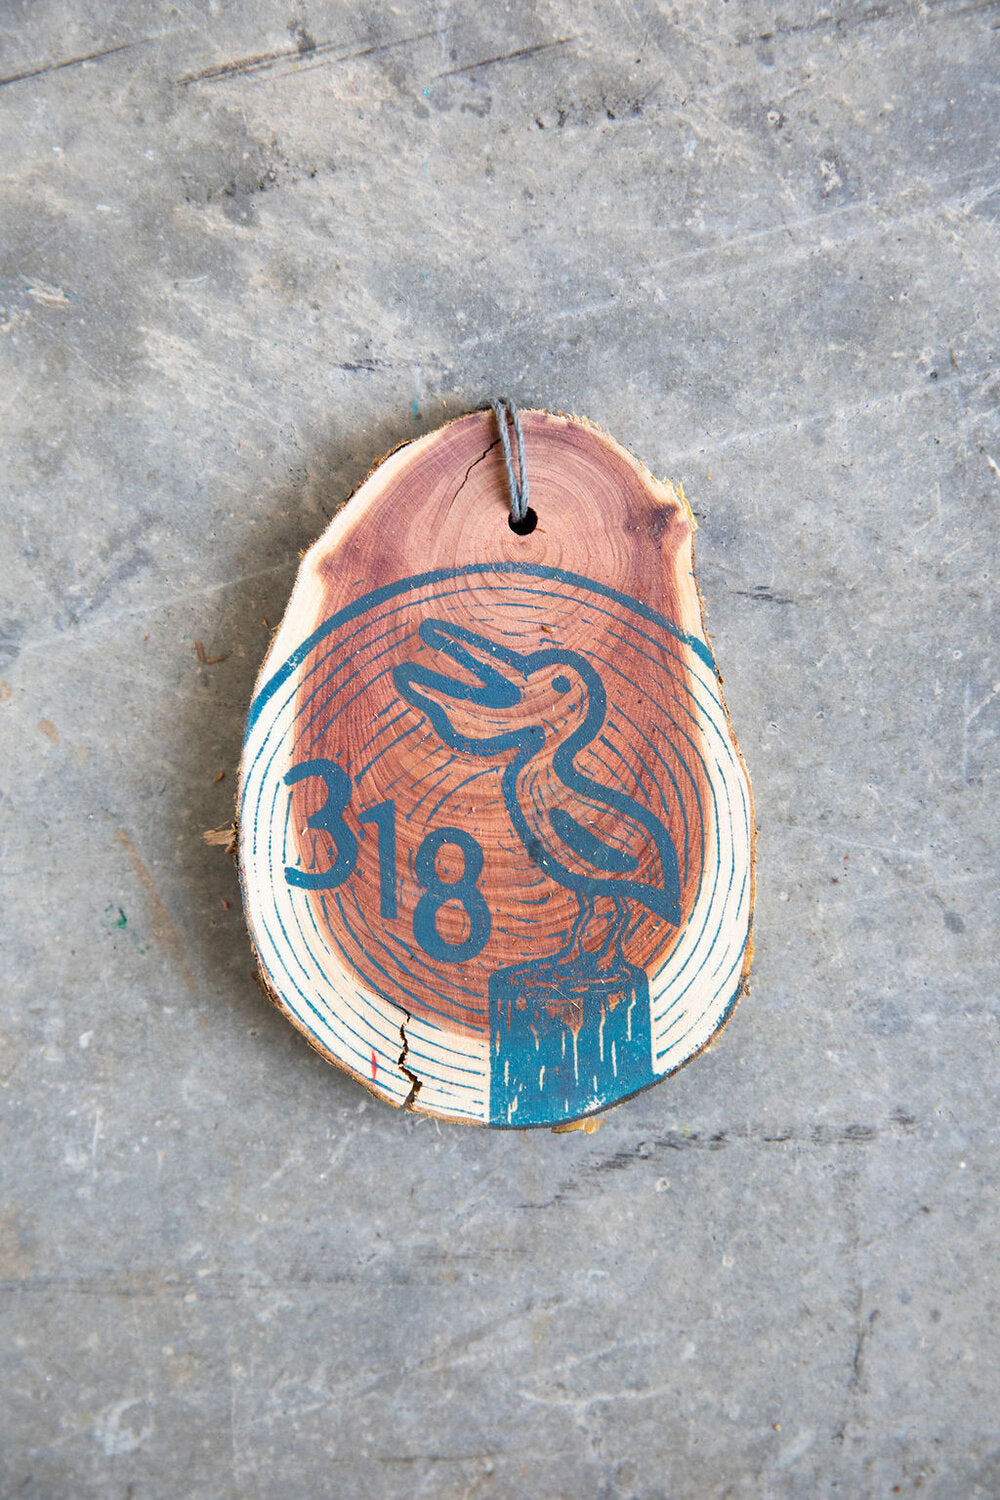 The 318 Wooden Hand Printed Ornament